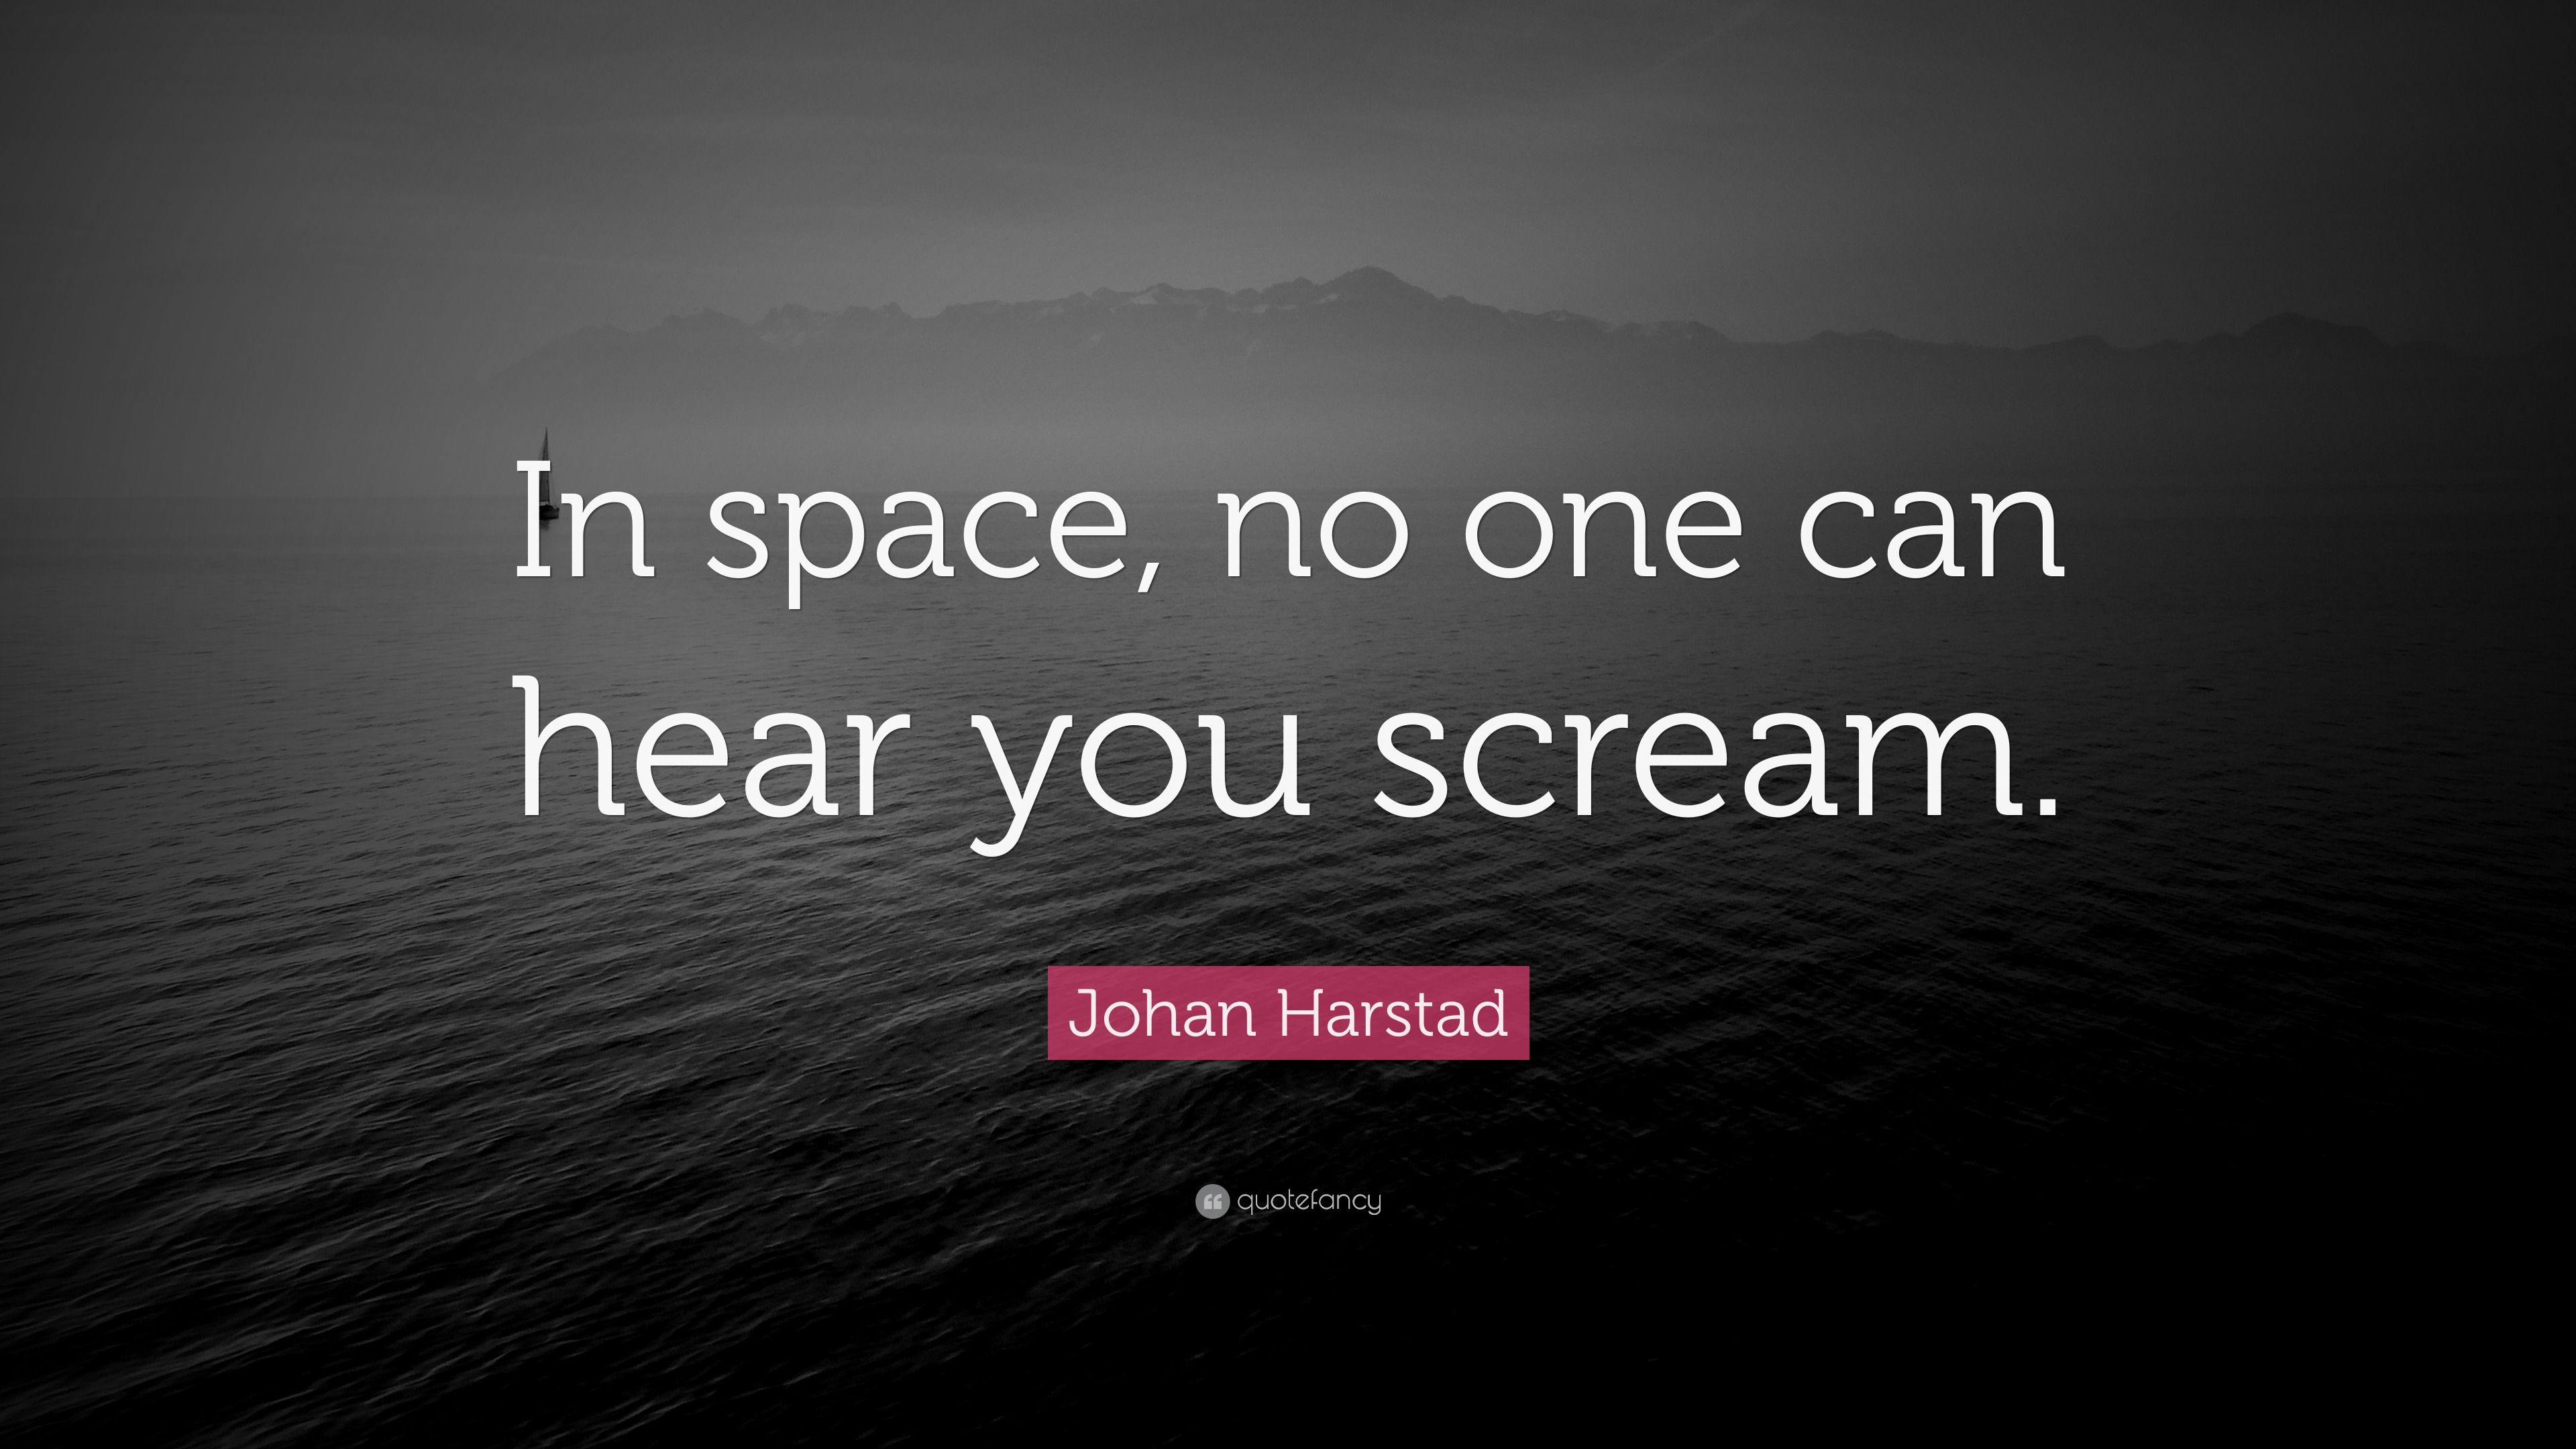 Johan Harstad Quote: “In space, no one can hear you scream.” (9 wallpapers ...3840 x 2160